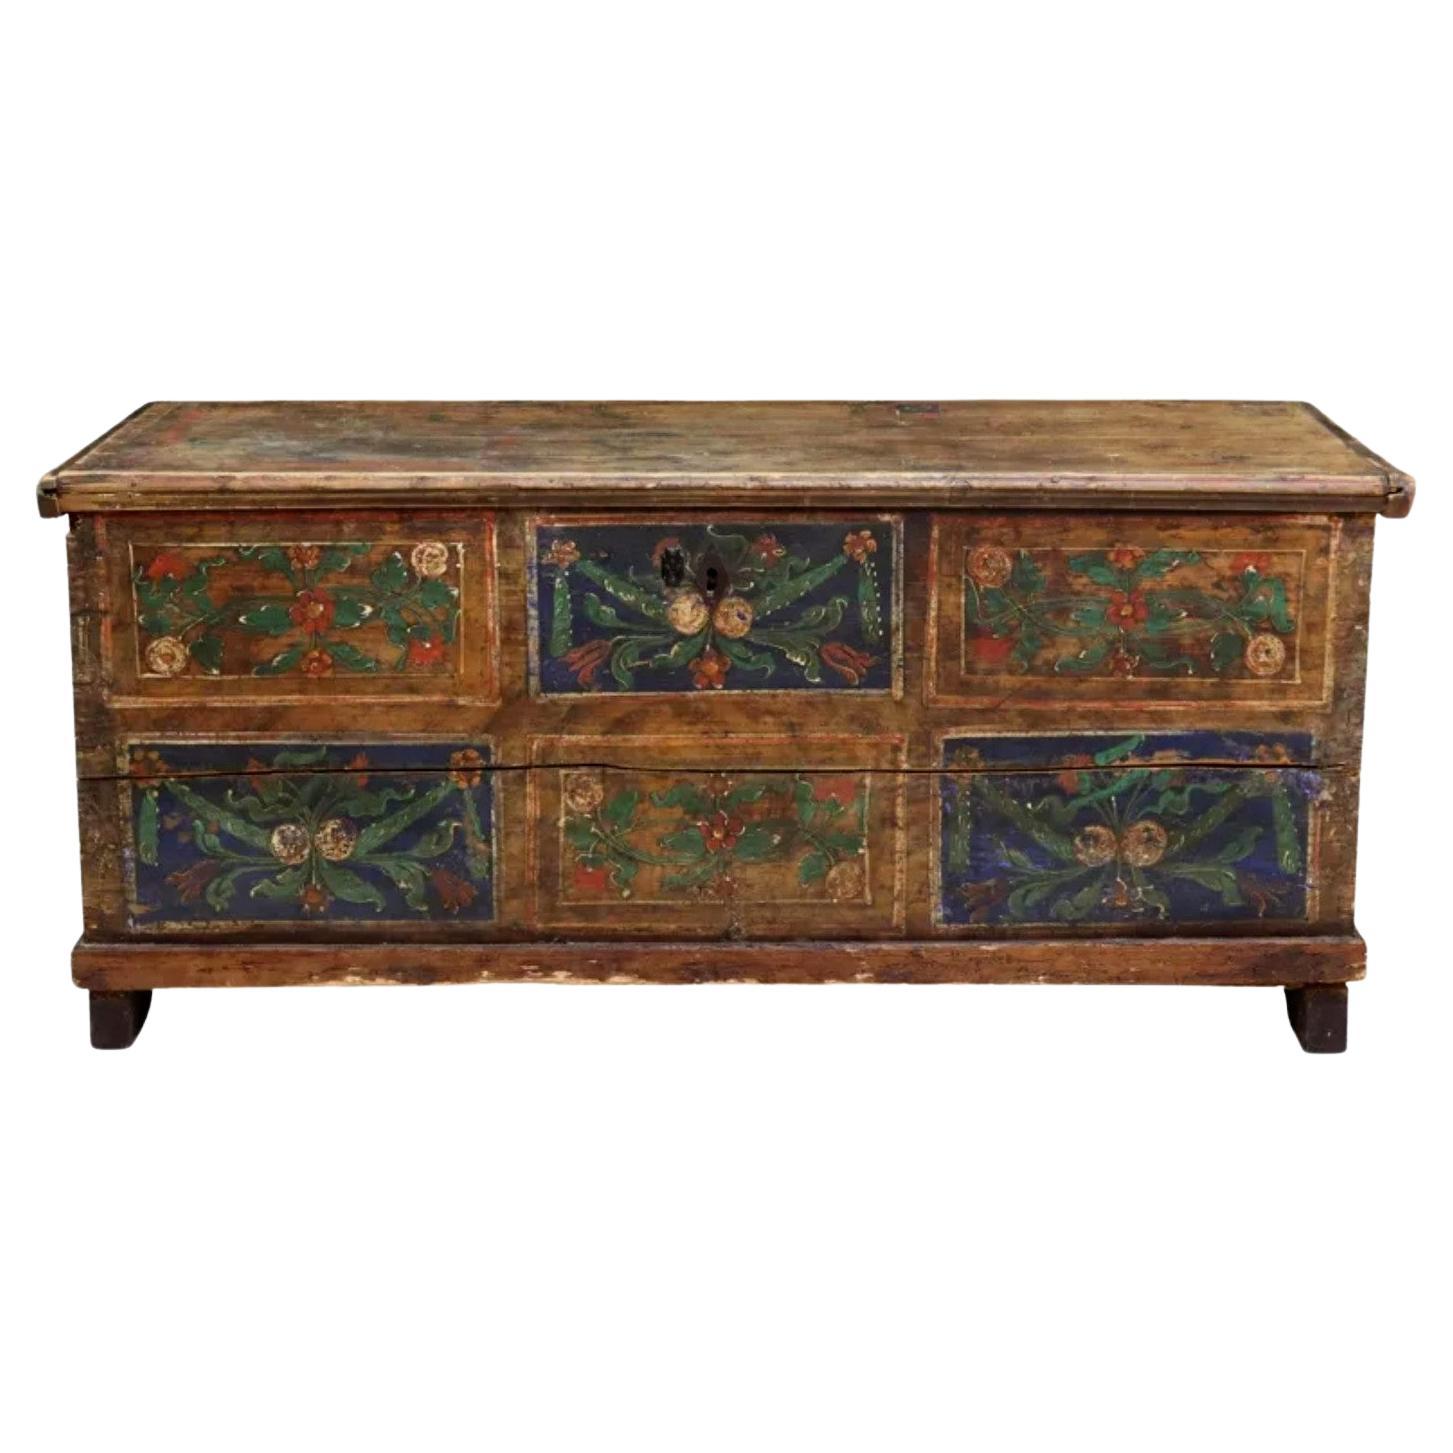 Early 19th Century Scandinavian Hand-Painted Pine Blanket Chest